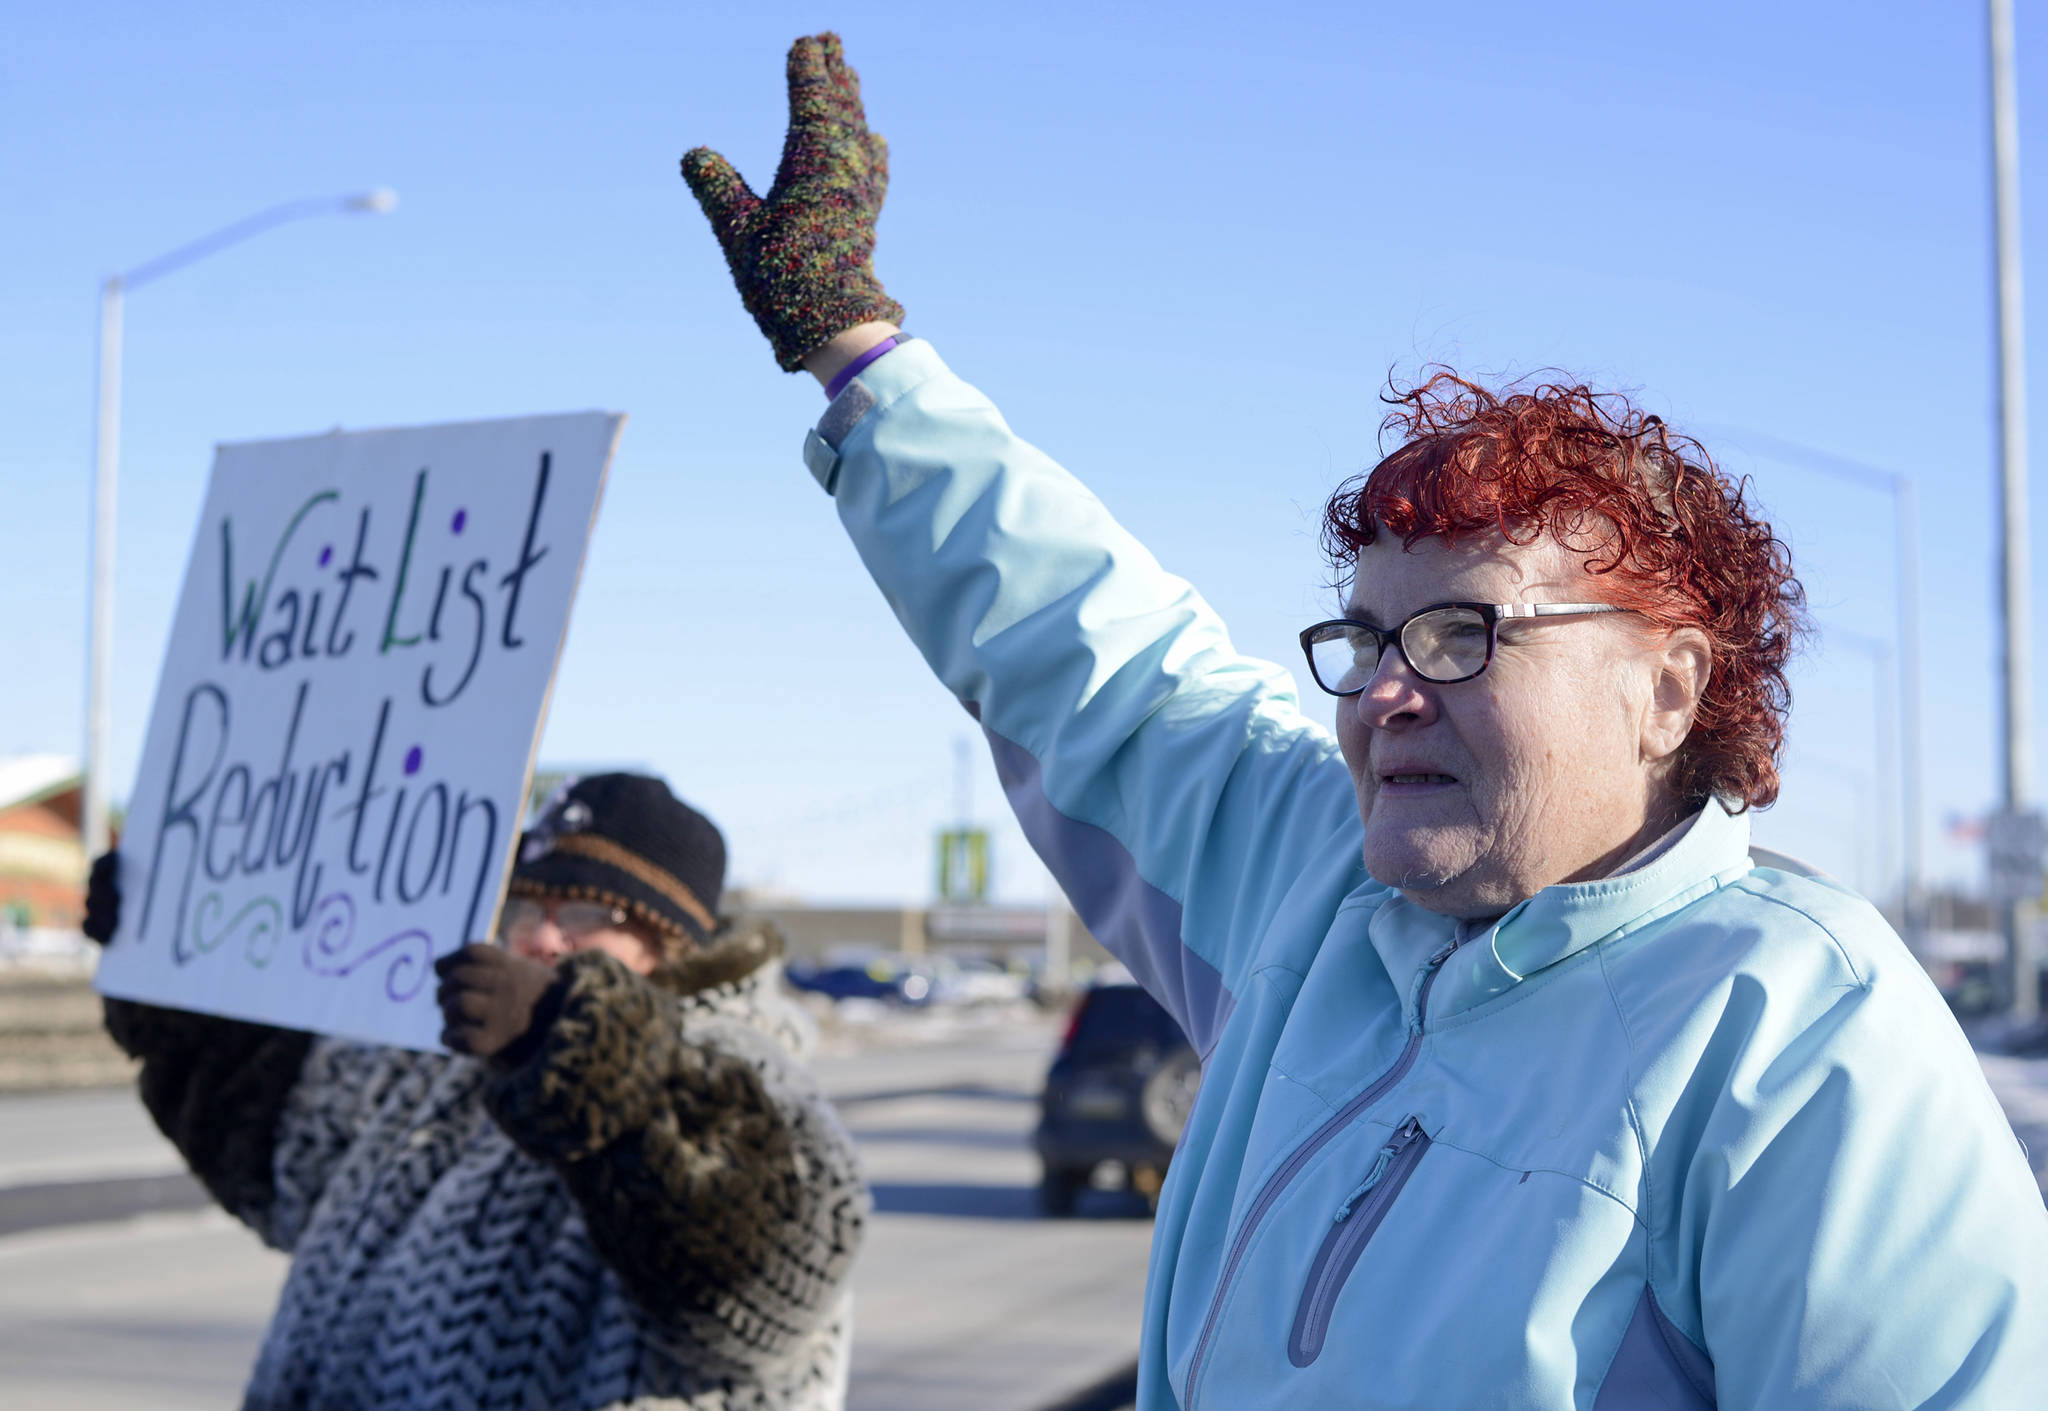 Teresa Reger (left, with sign) and Susie Stafford wave to passing cars at the annual demonstration in support of disability services by the Key Coalition advocacy group, held this year on March 3, 2017 in Soldotna. Reger and Stafford are both parents of disabled adult children who recieve services through the program the Key Campaign seeks to preserve. (Ben Boettger/Peninsula Clarion, file)